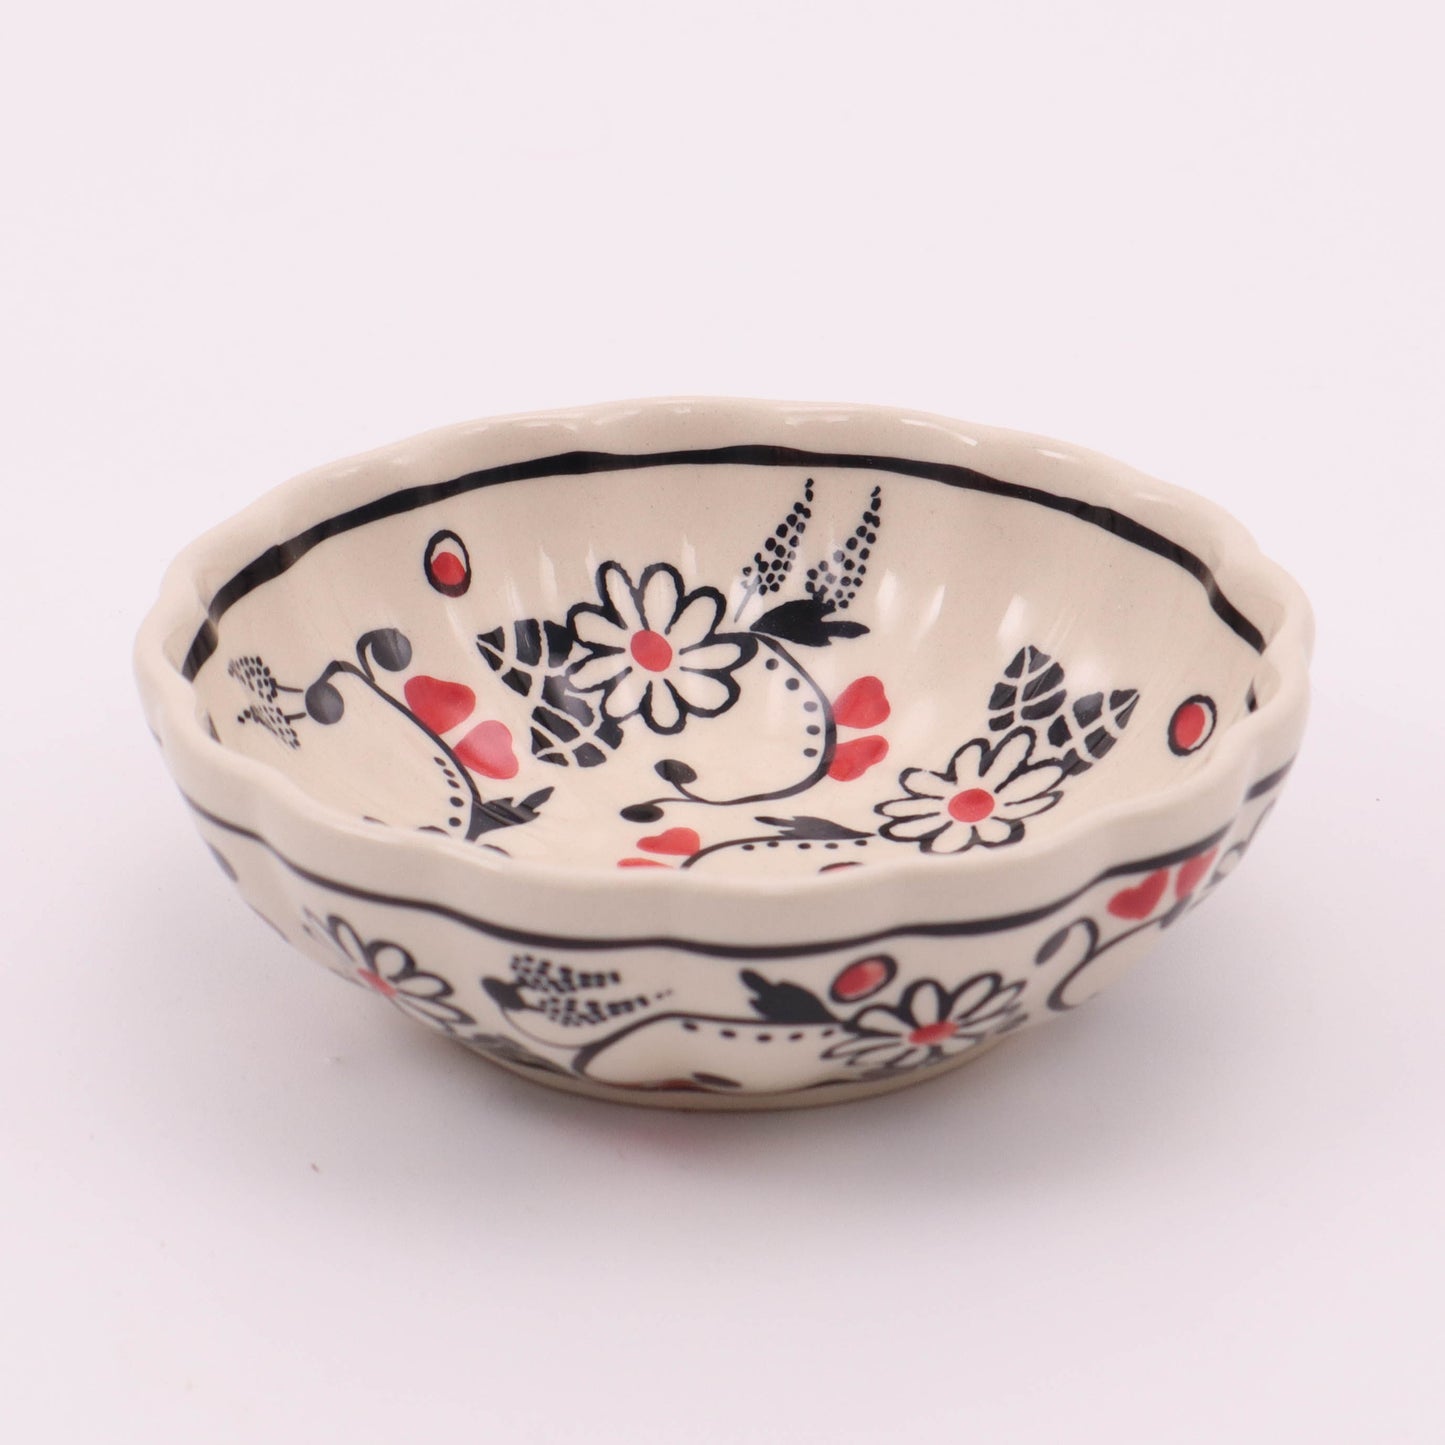 4.5" X 2" Scalloped Round Bowl.  Pattern: Red Hearts